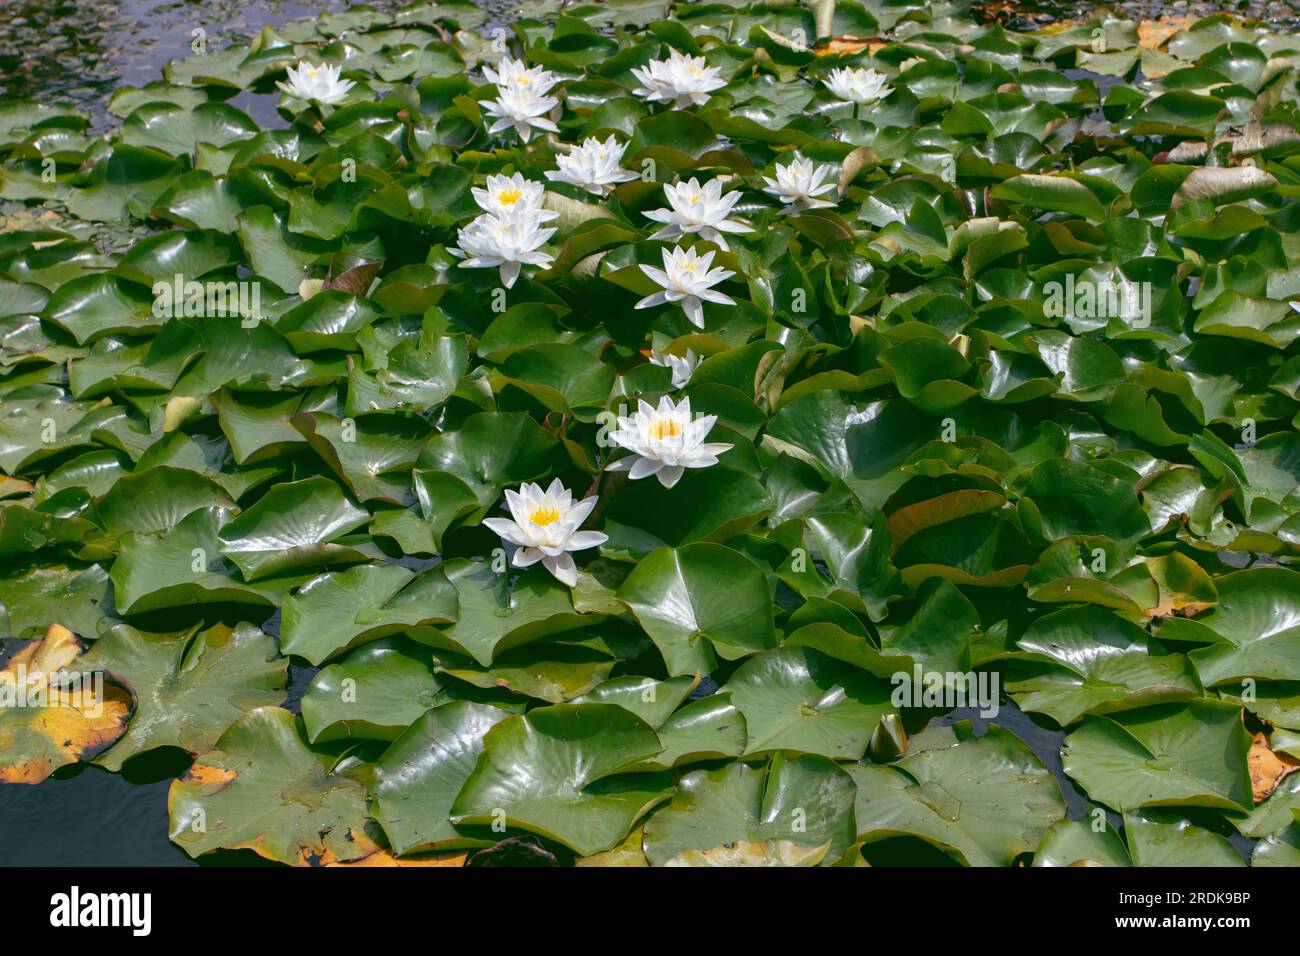 Nymphaea odorata aquatic plants in the pond. Fragrant white water lily flowers and leaves on the water surface. Stock Photo